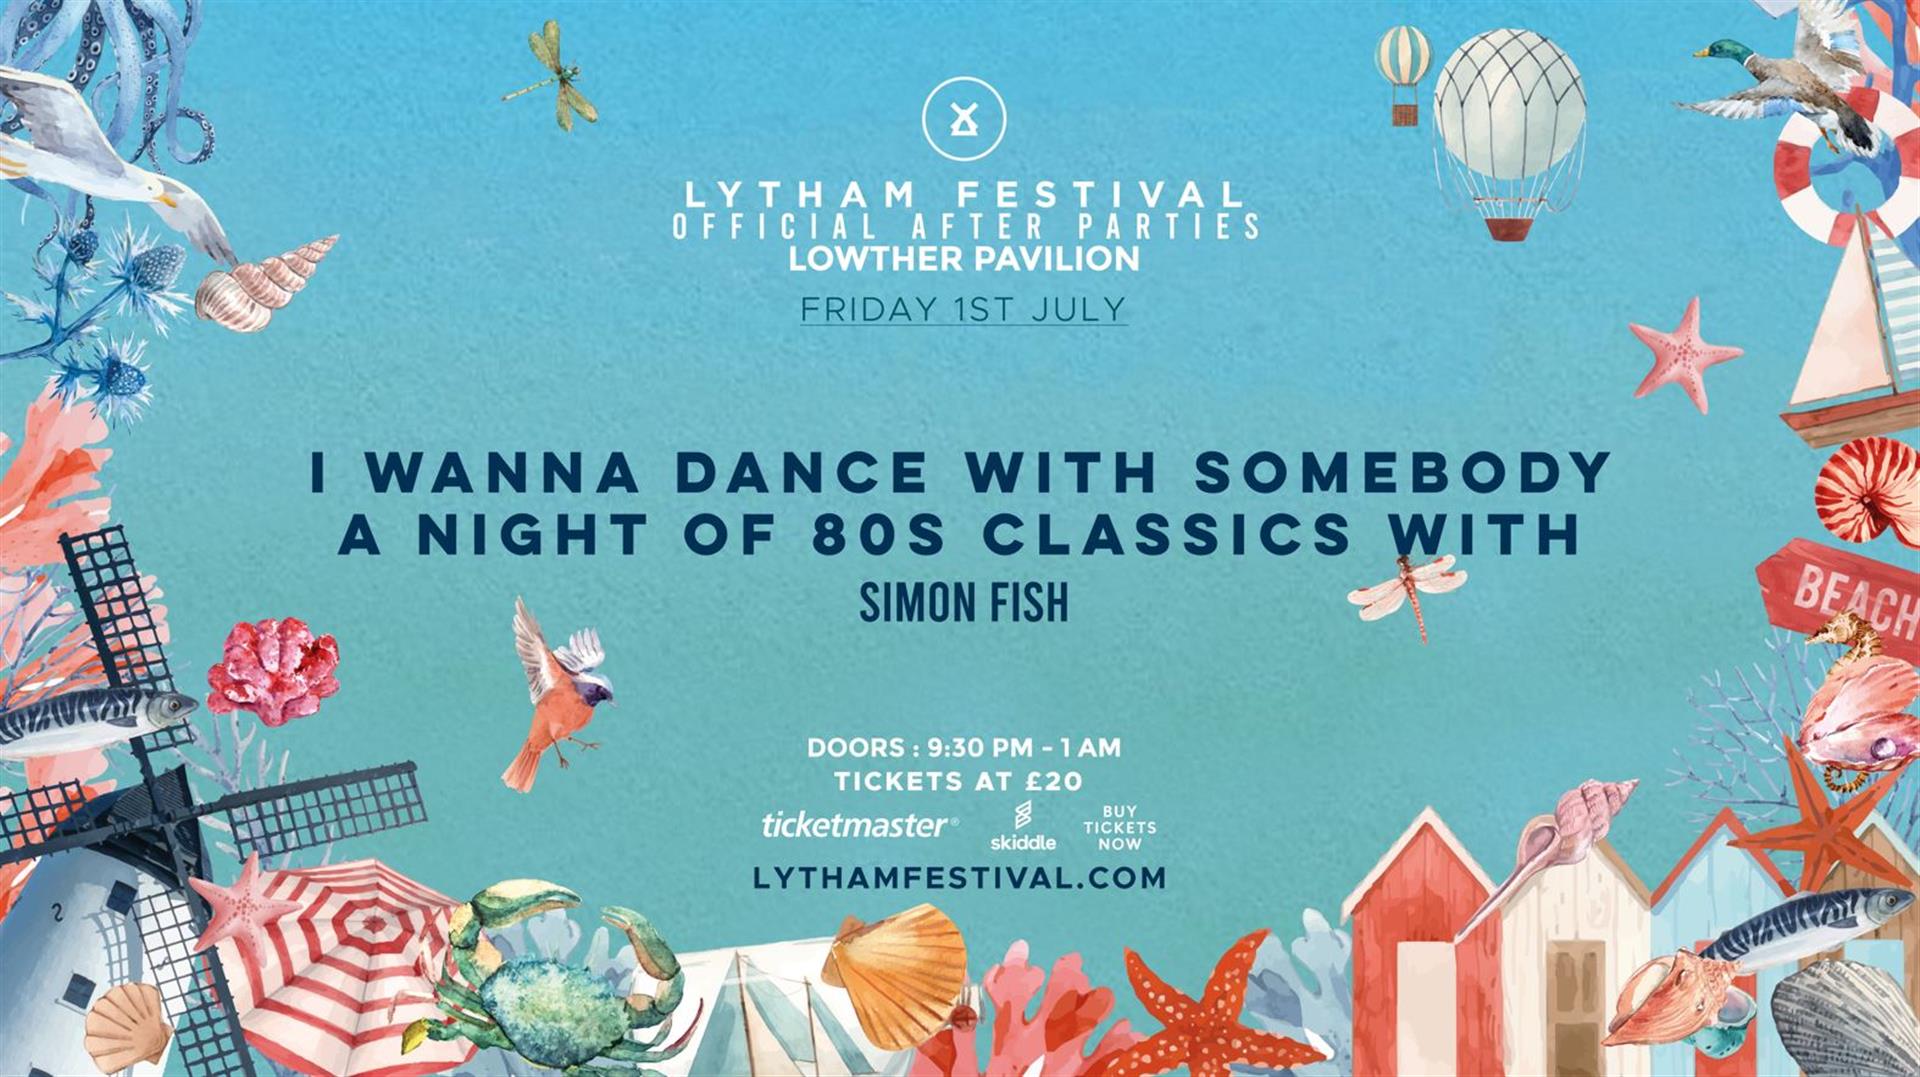 Lytham Festival Official After Parties – A Night Of 80s Classics - Lowther Pavilion